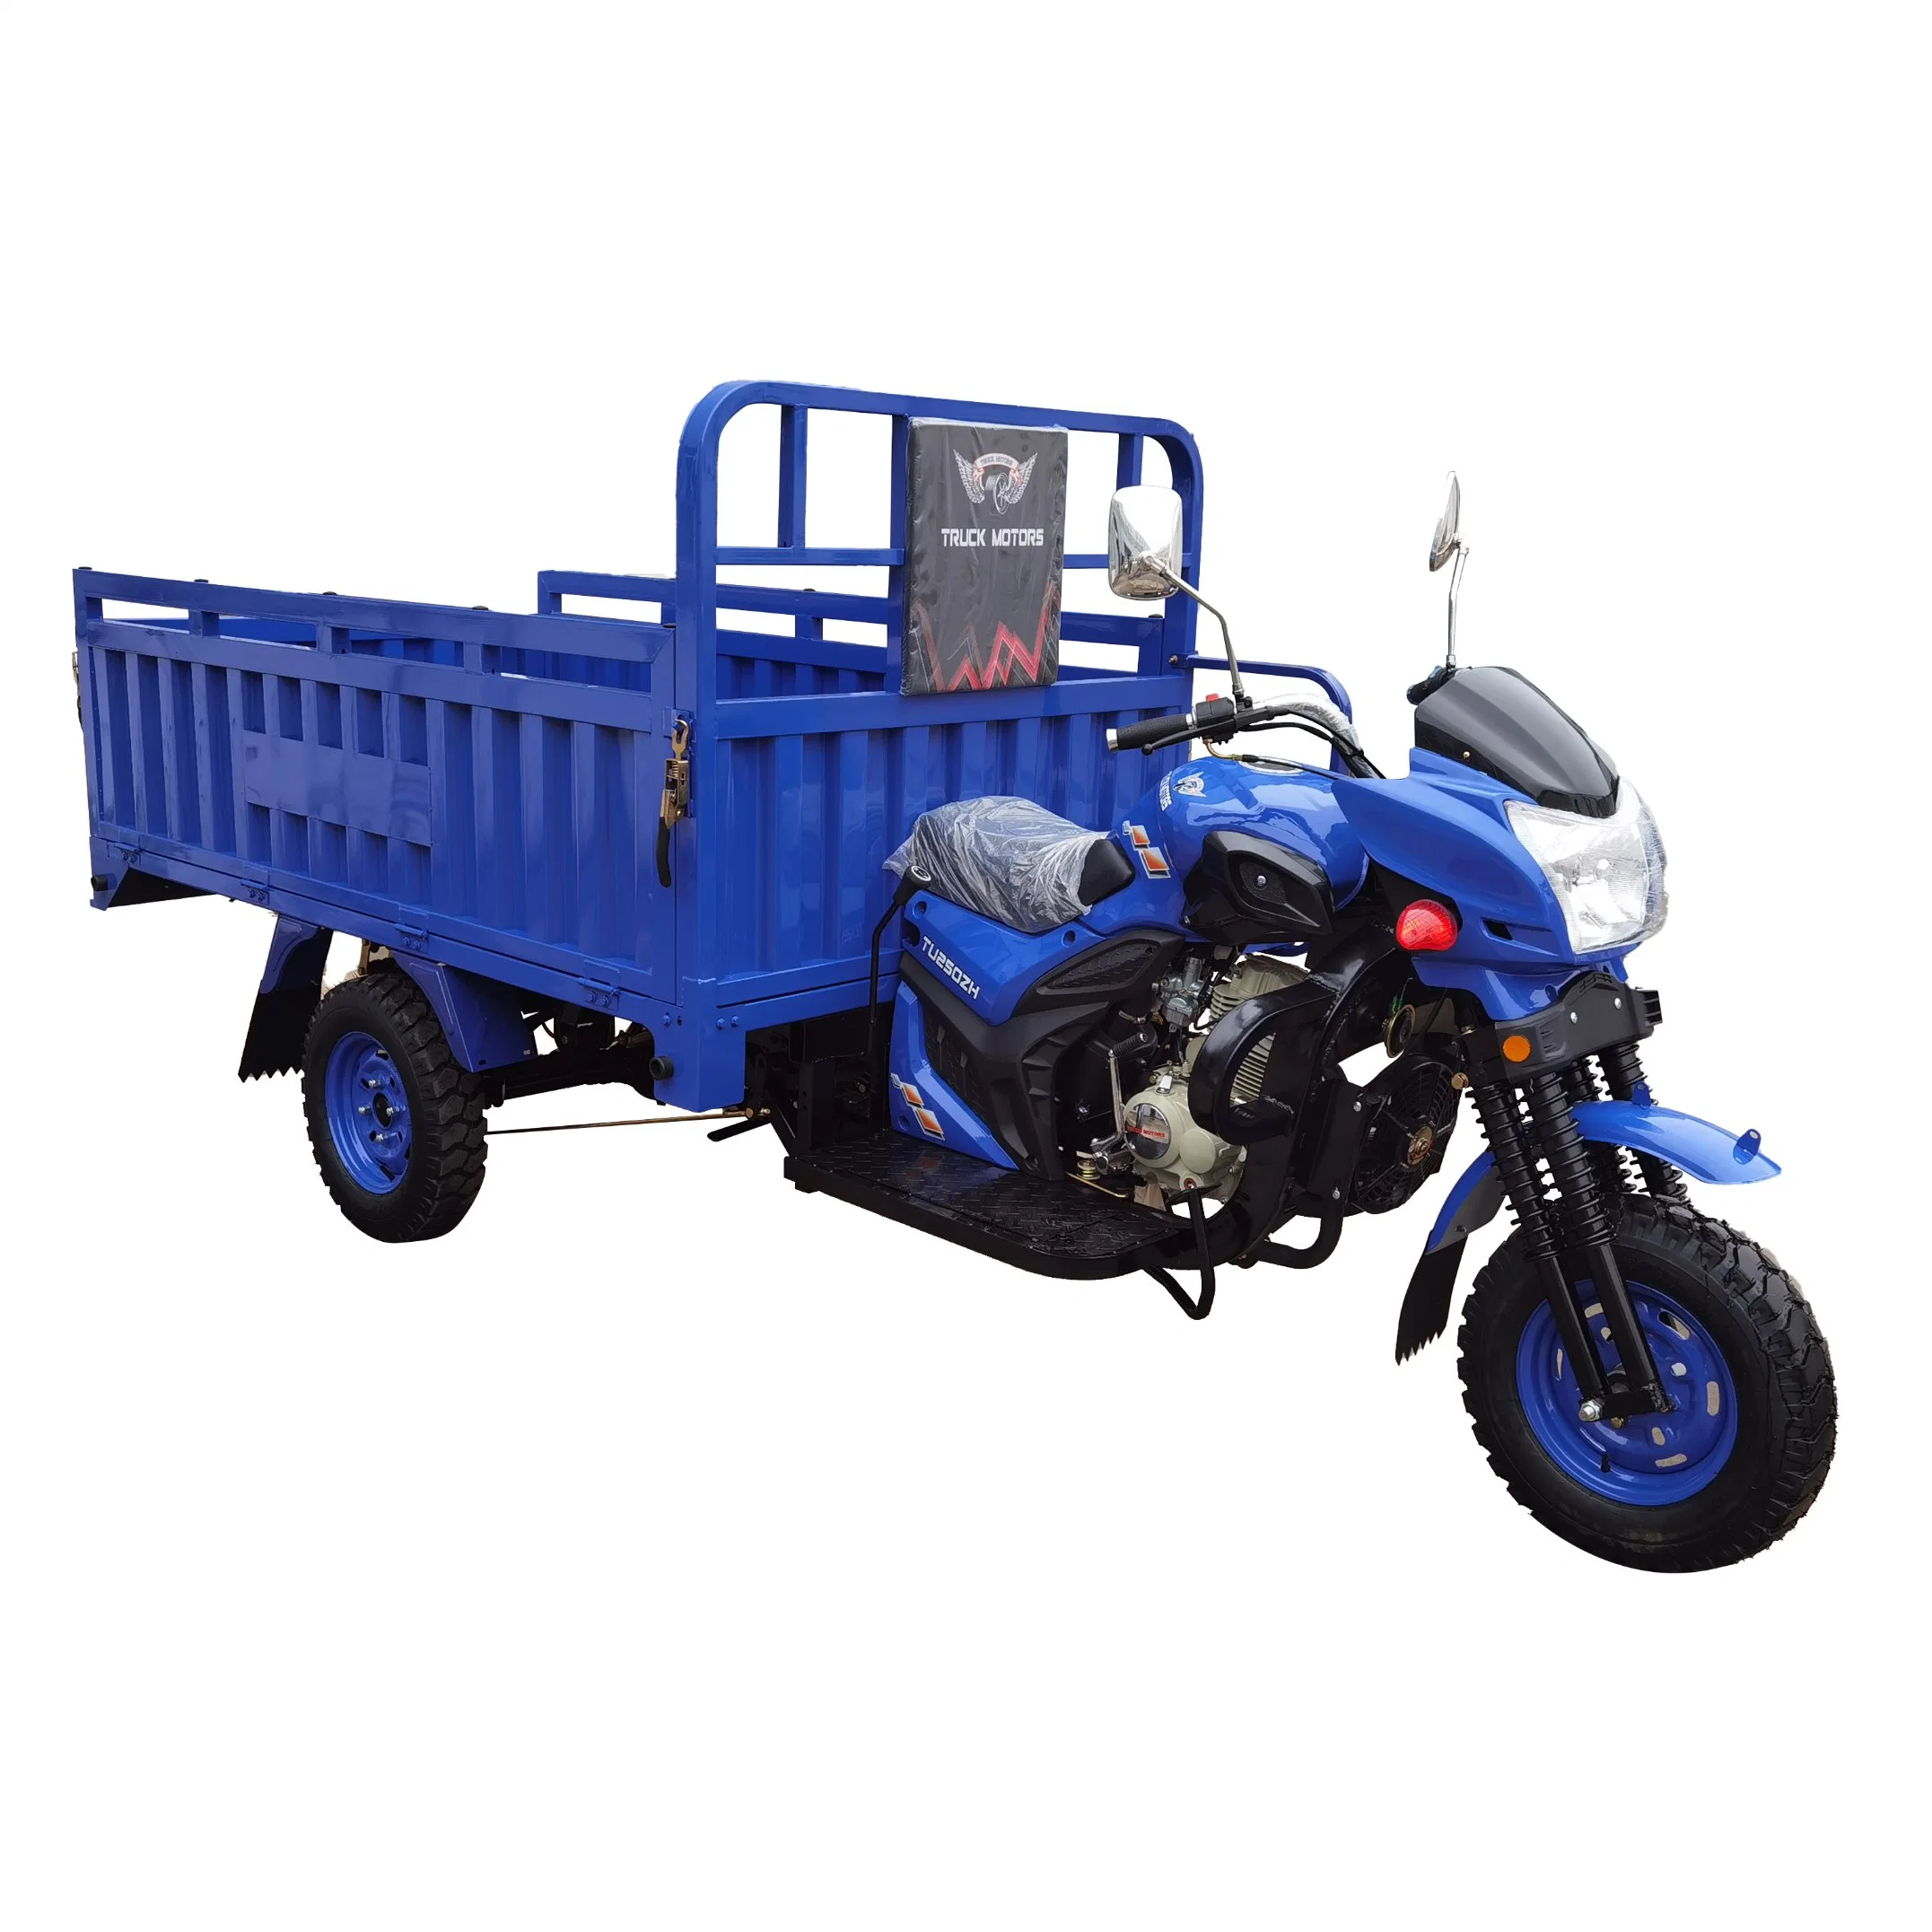 Super Cost-Effective 200cc/250cc Air-Cooled Engine Agricultural Tricycle/Cargo Tricycle/Three-Wheel Motorcycle/Tricycle